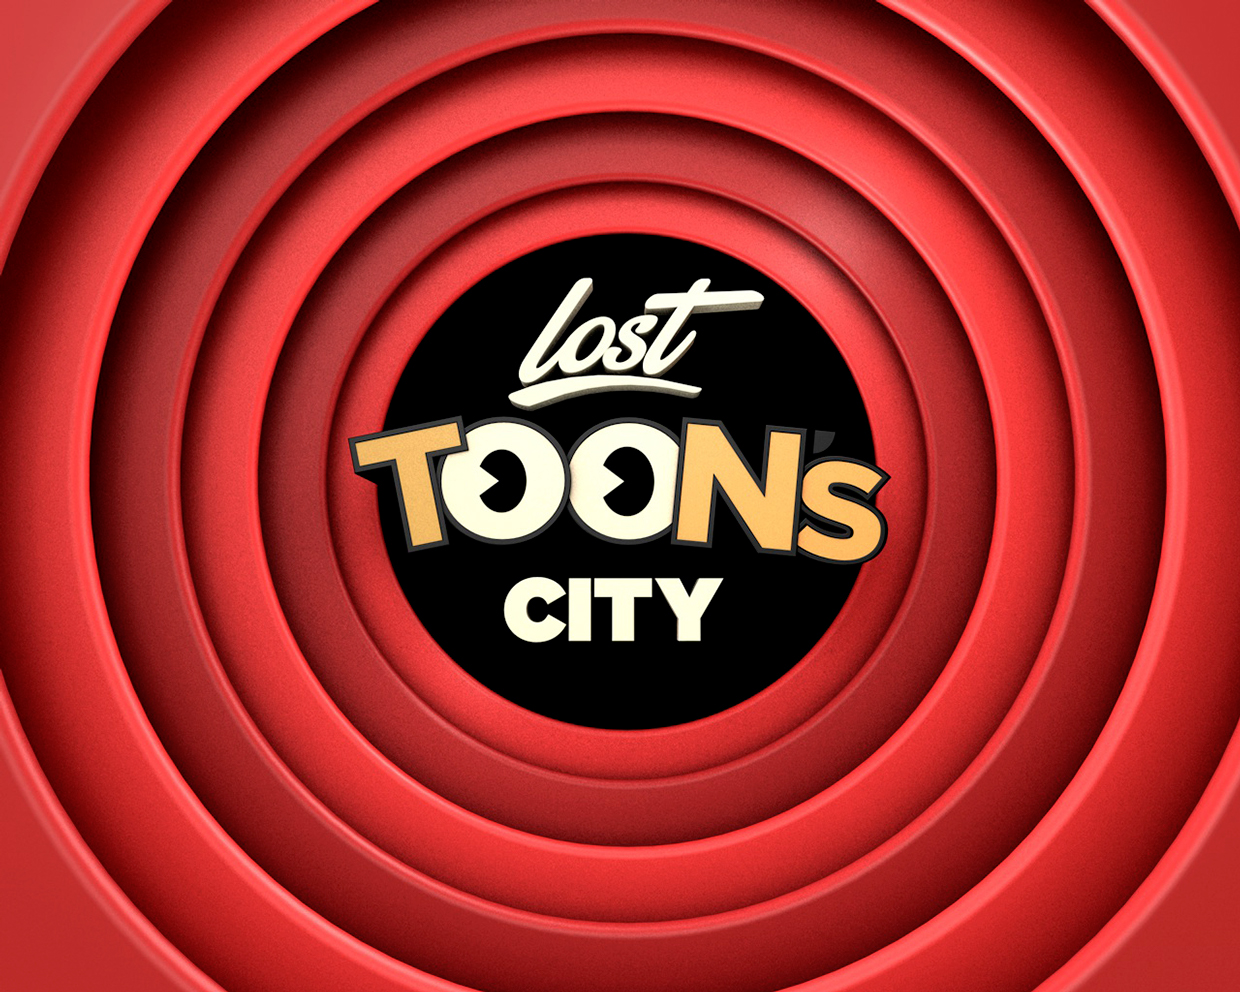 lost-toons-city